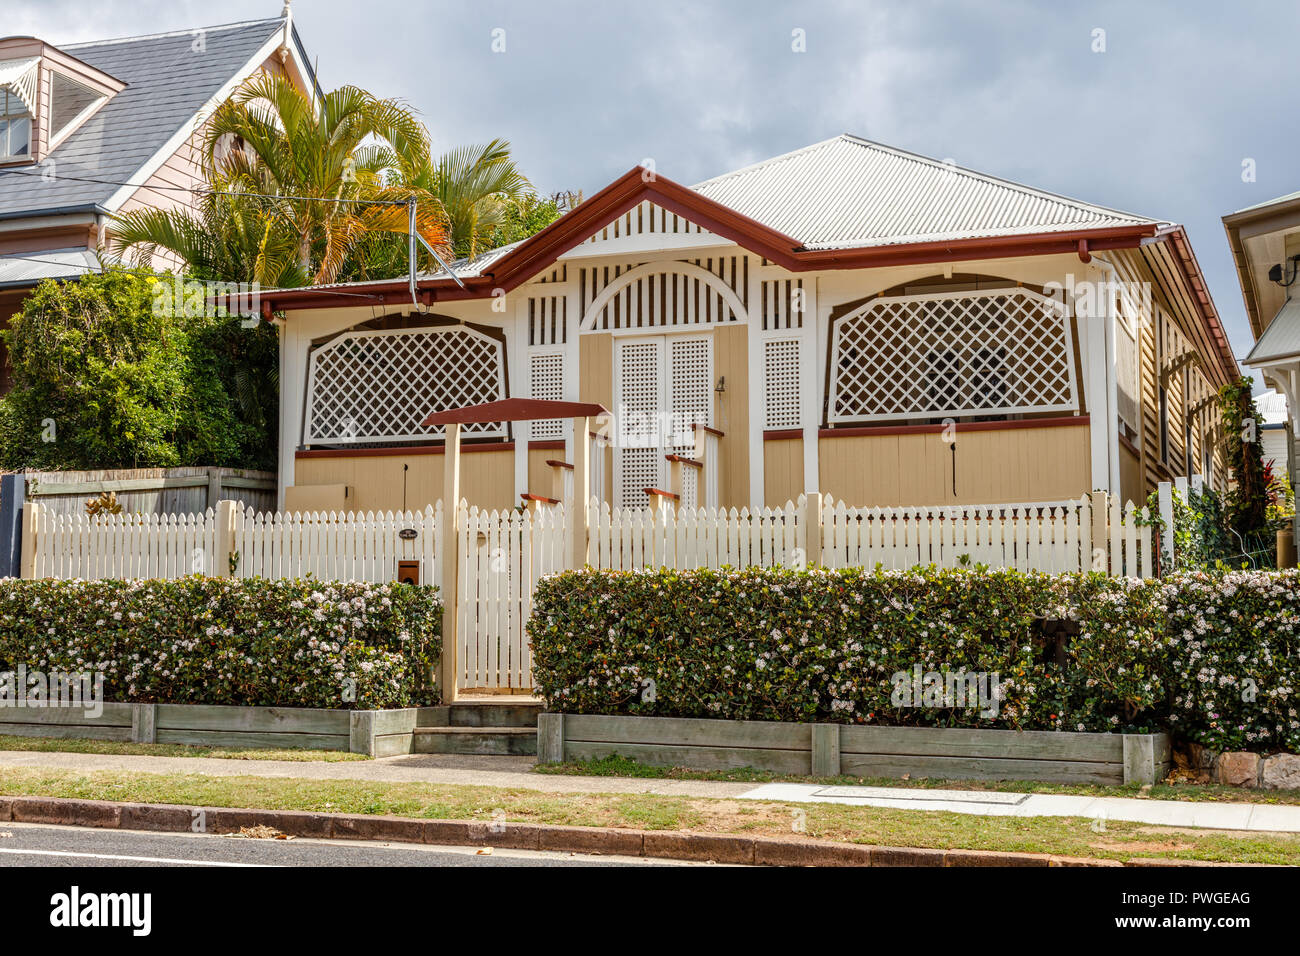 Australian countryside. Old Queenslander style house in suburbs. Shorncliffe, Australia Stock Photo